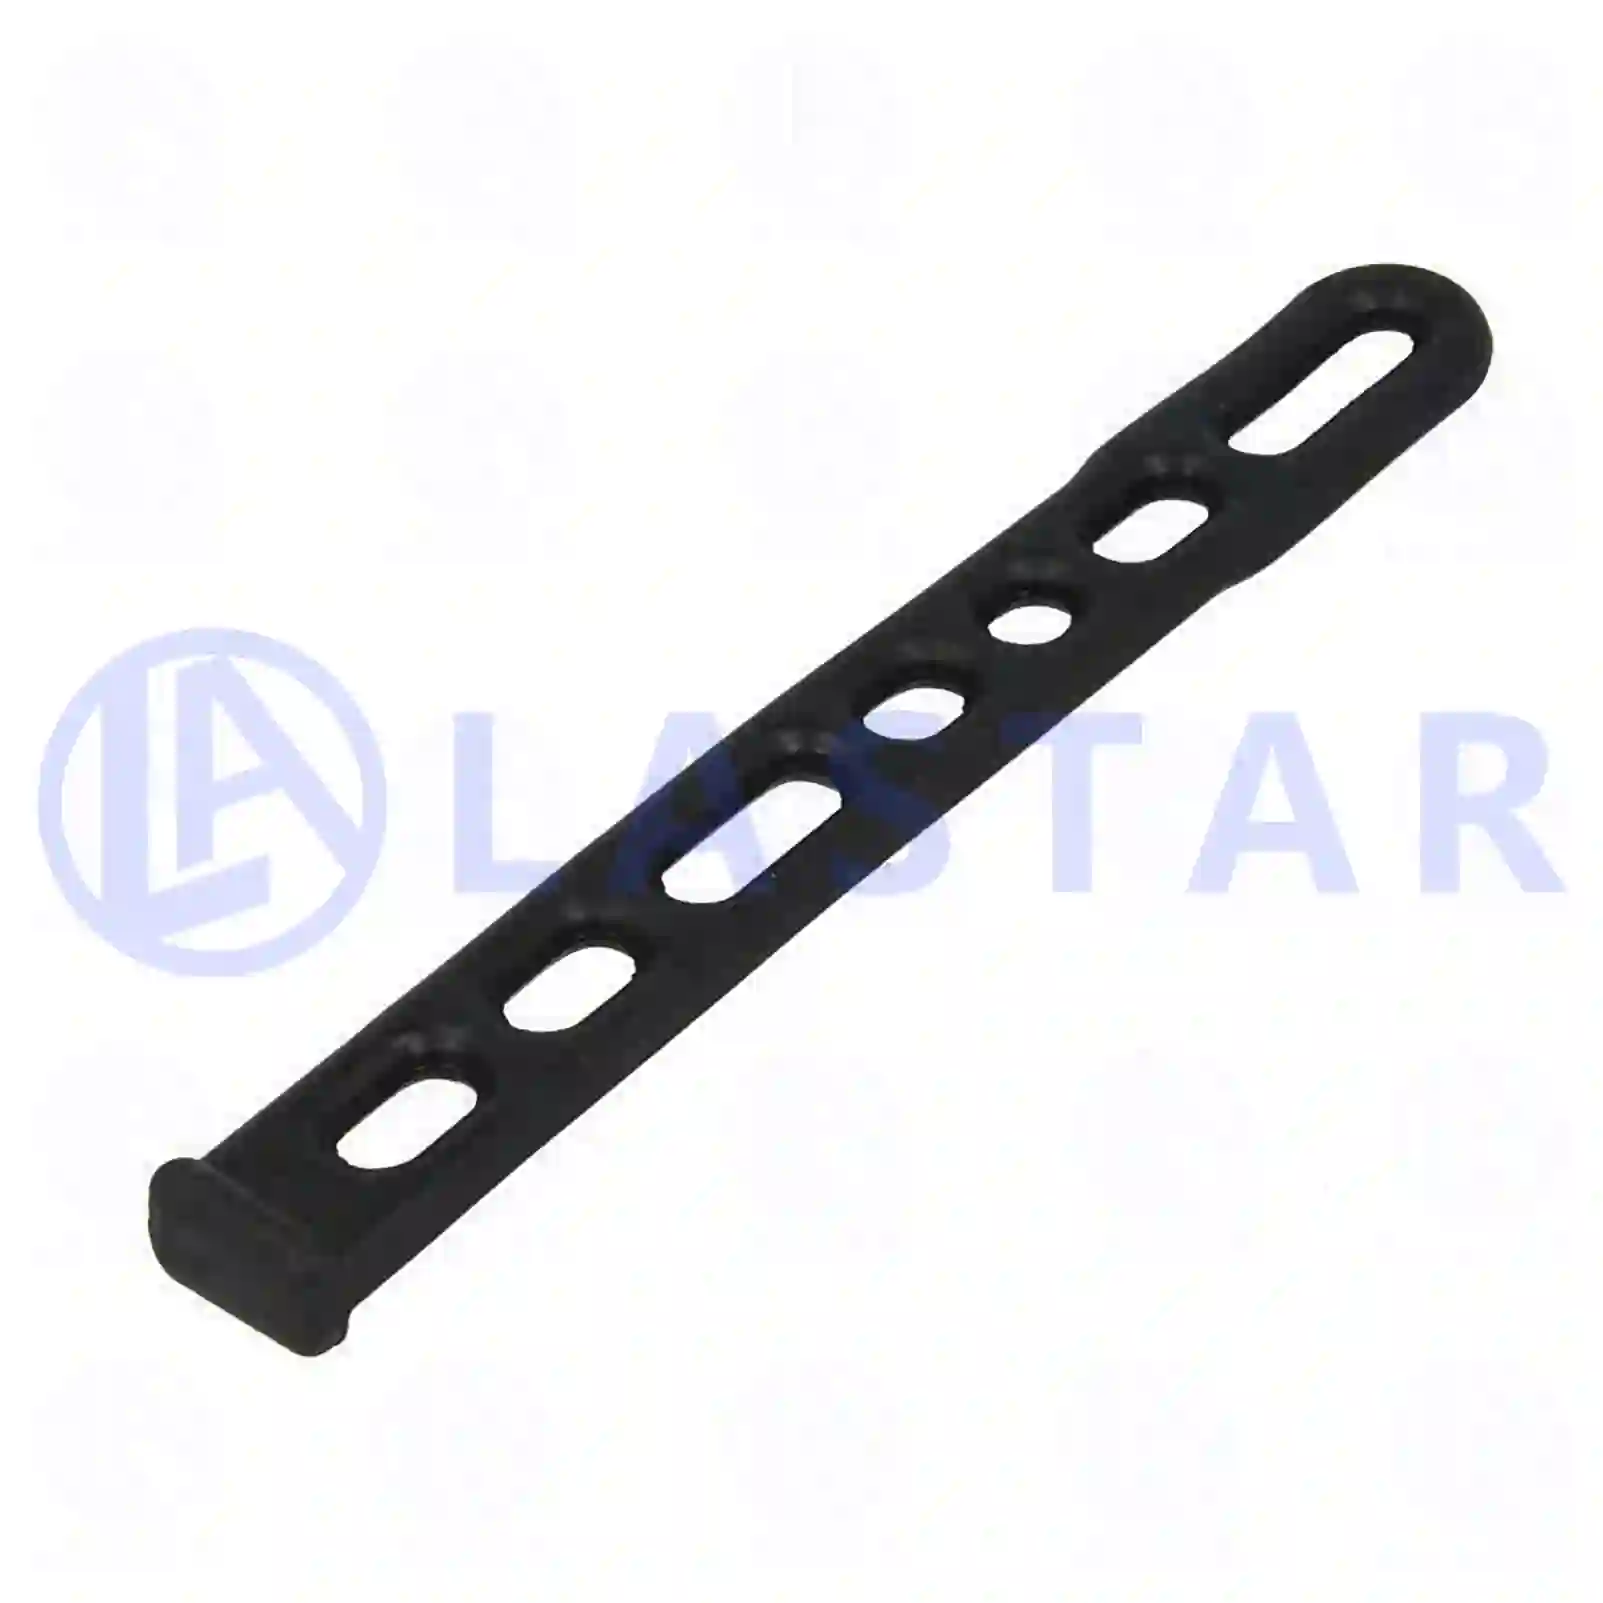  Tensioning band || Lastar Spare Part | Truck Spare Parts, Auotomotive Spare Parts